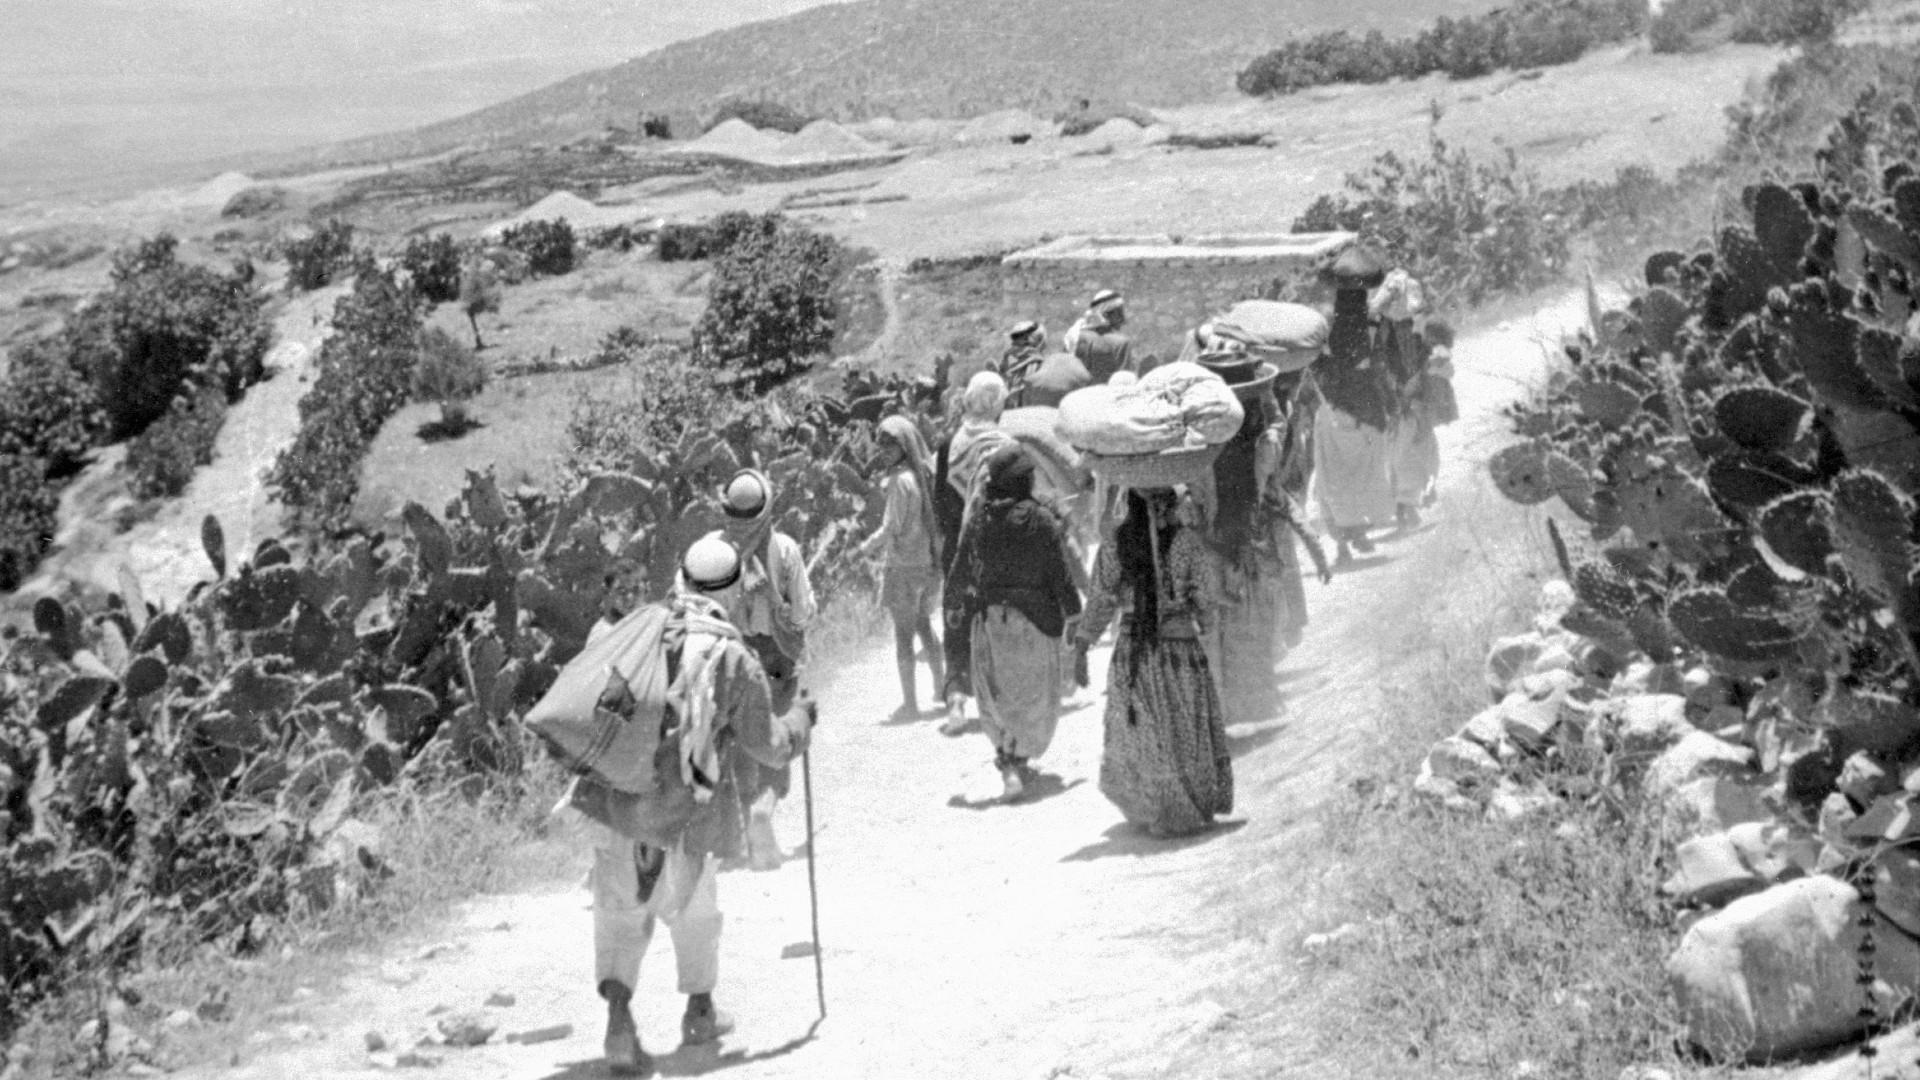  In this file photo released on September 15, 1948, Palestinian refugees return to their village after its surrender during the 1948 Arab war against the proclamation of the Israeli State.